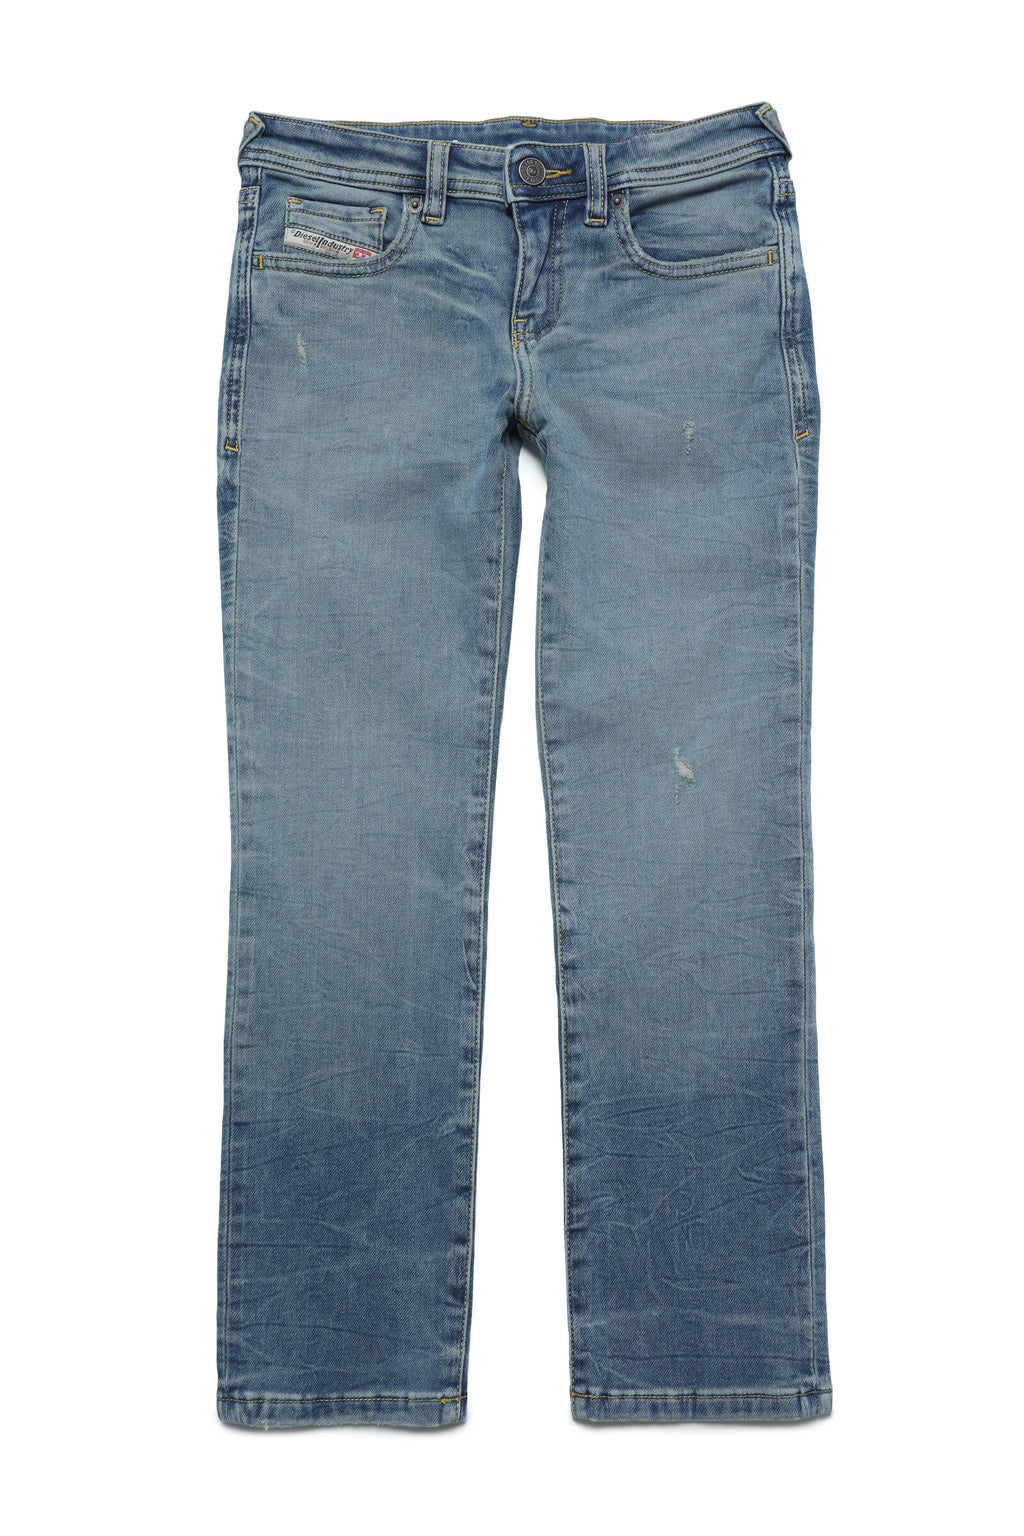 JoggJeans® 2002 straight light blue with abrasions